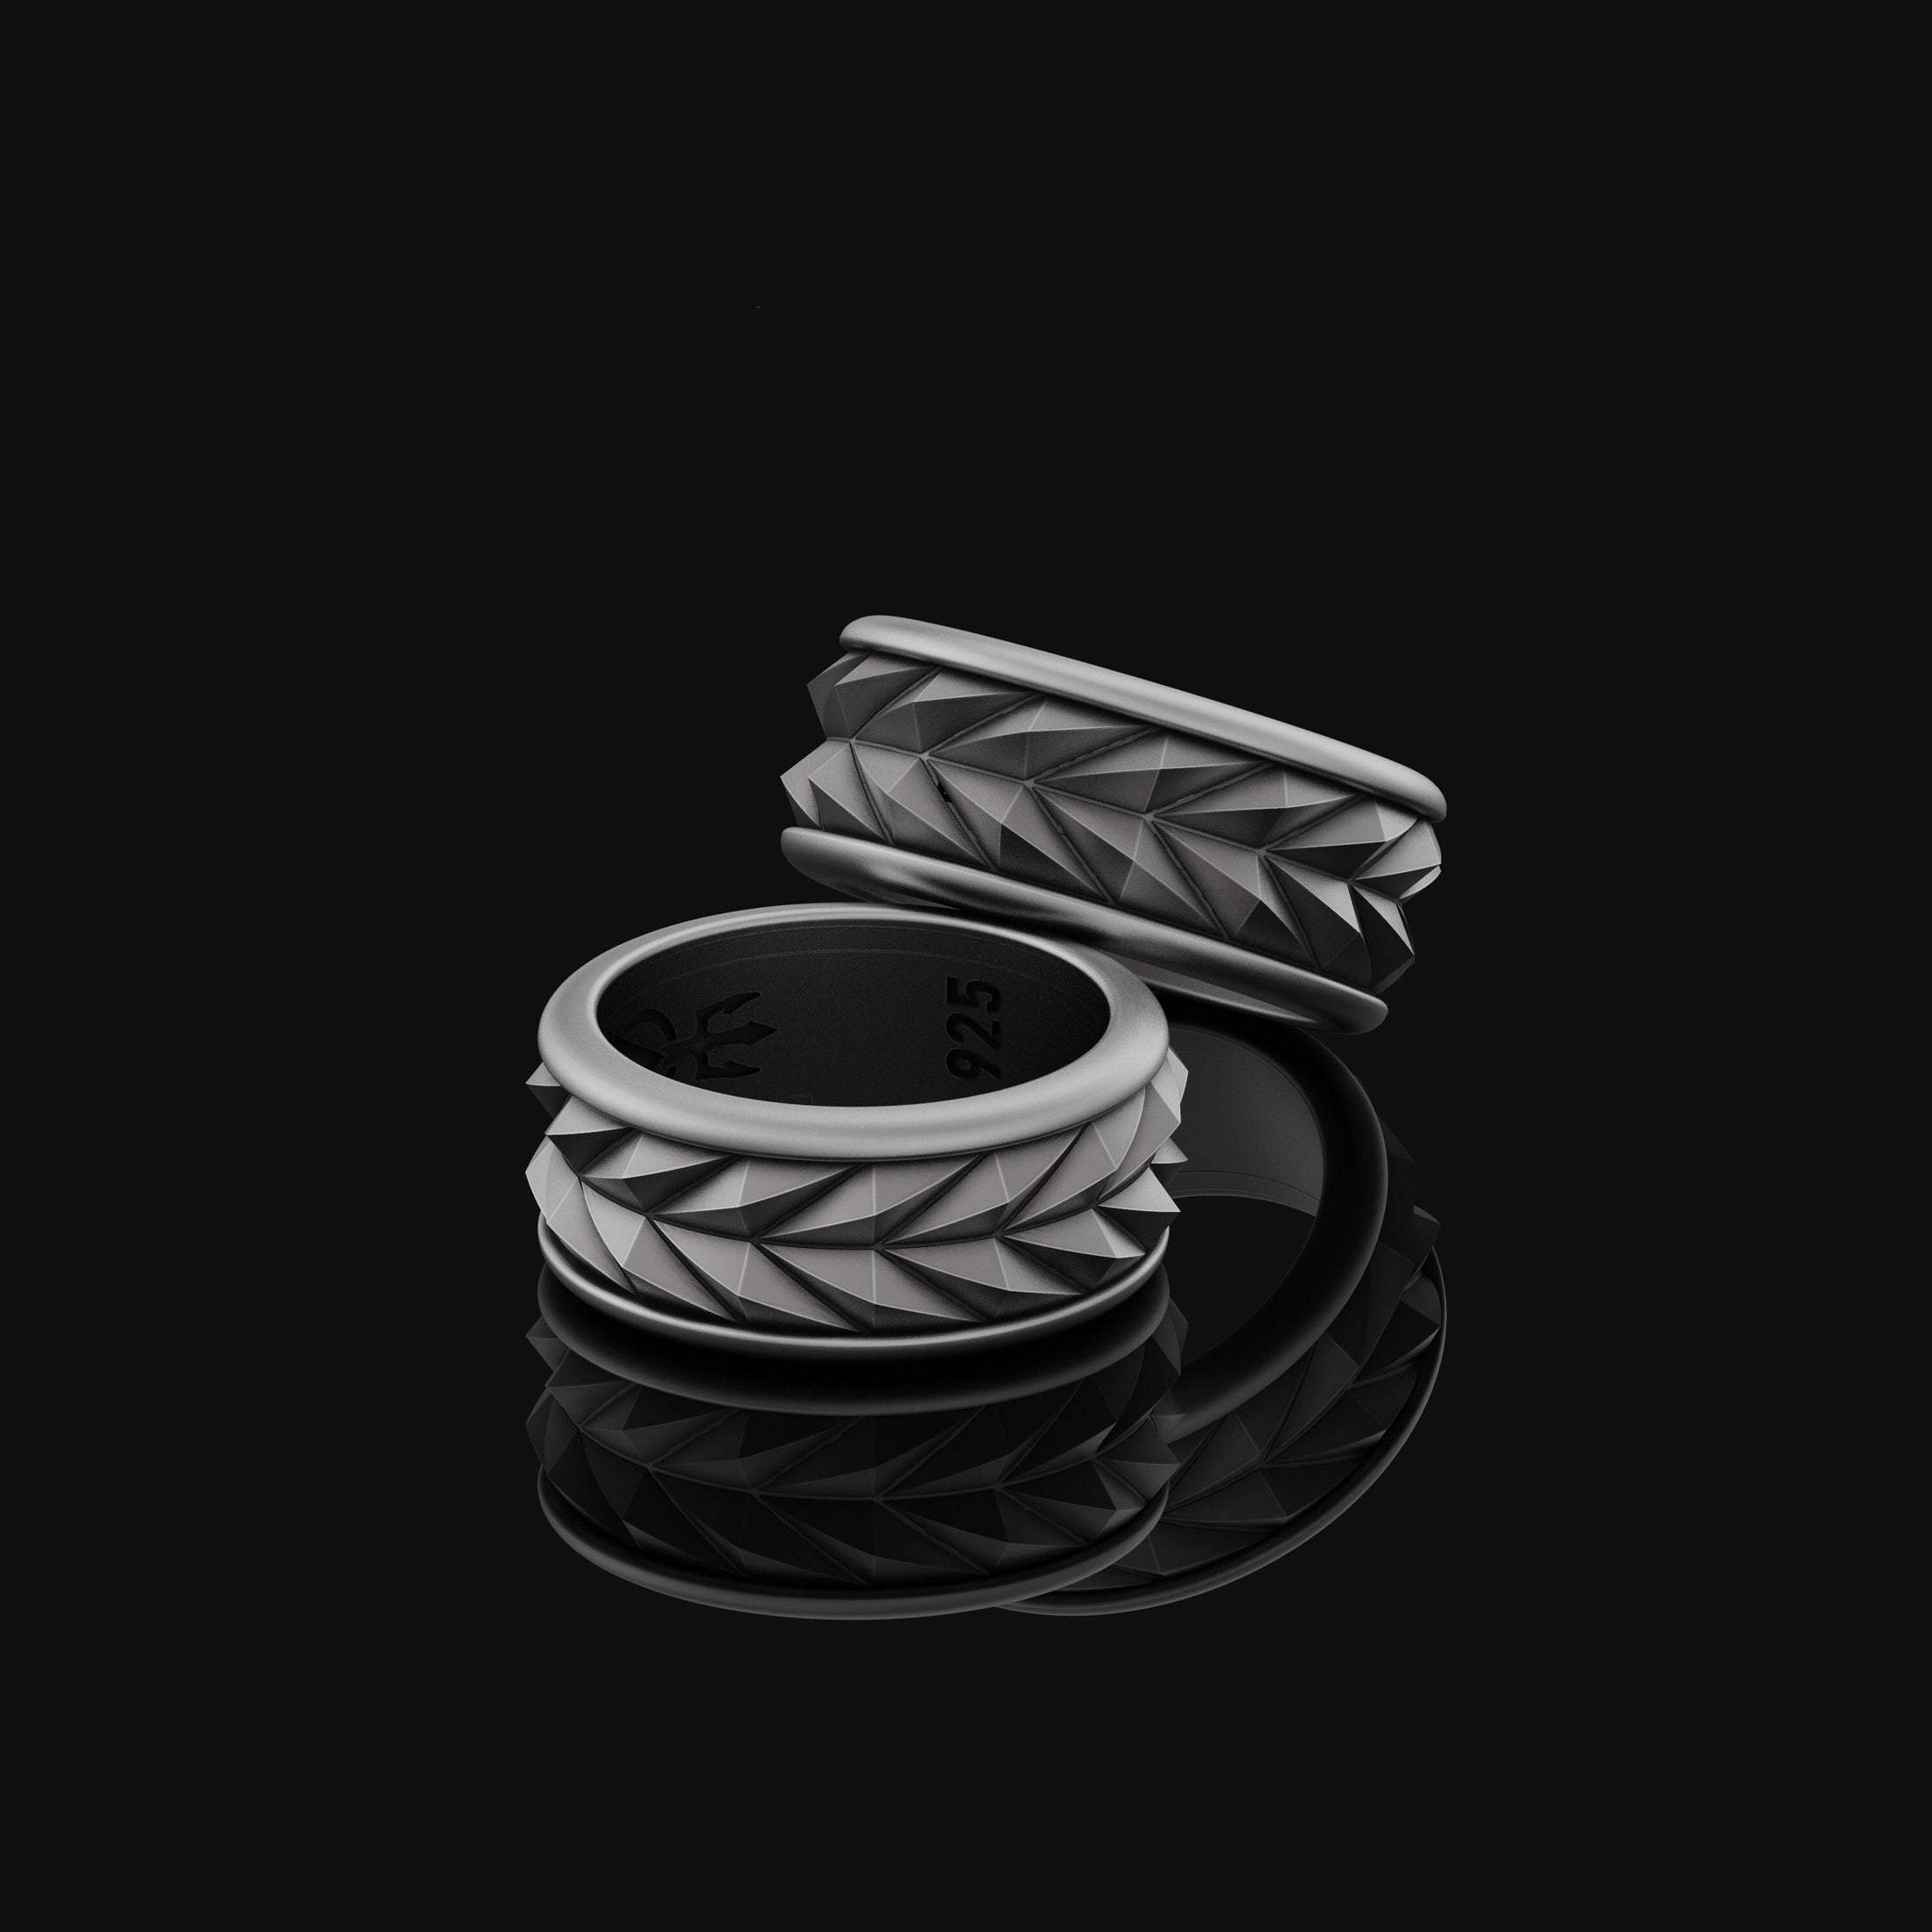 Silver Rotating Tire Pattern Band Ring - Auto-Inspired Wheel Design, Mechanic Style, Unique Car Lover's Jewelry